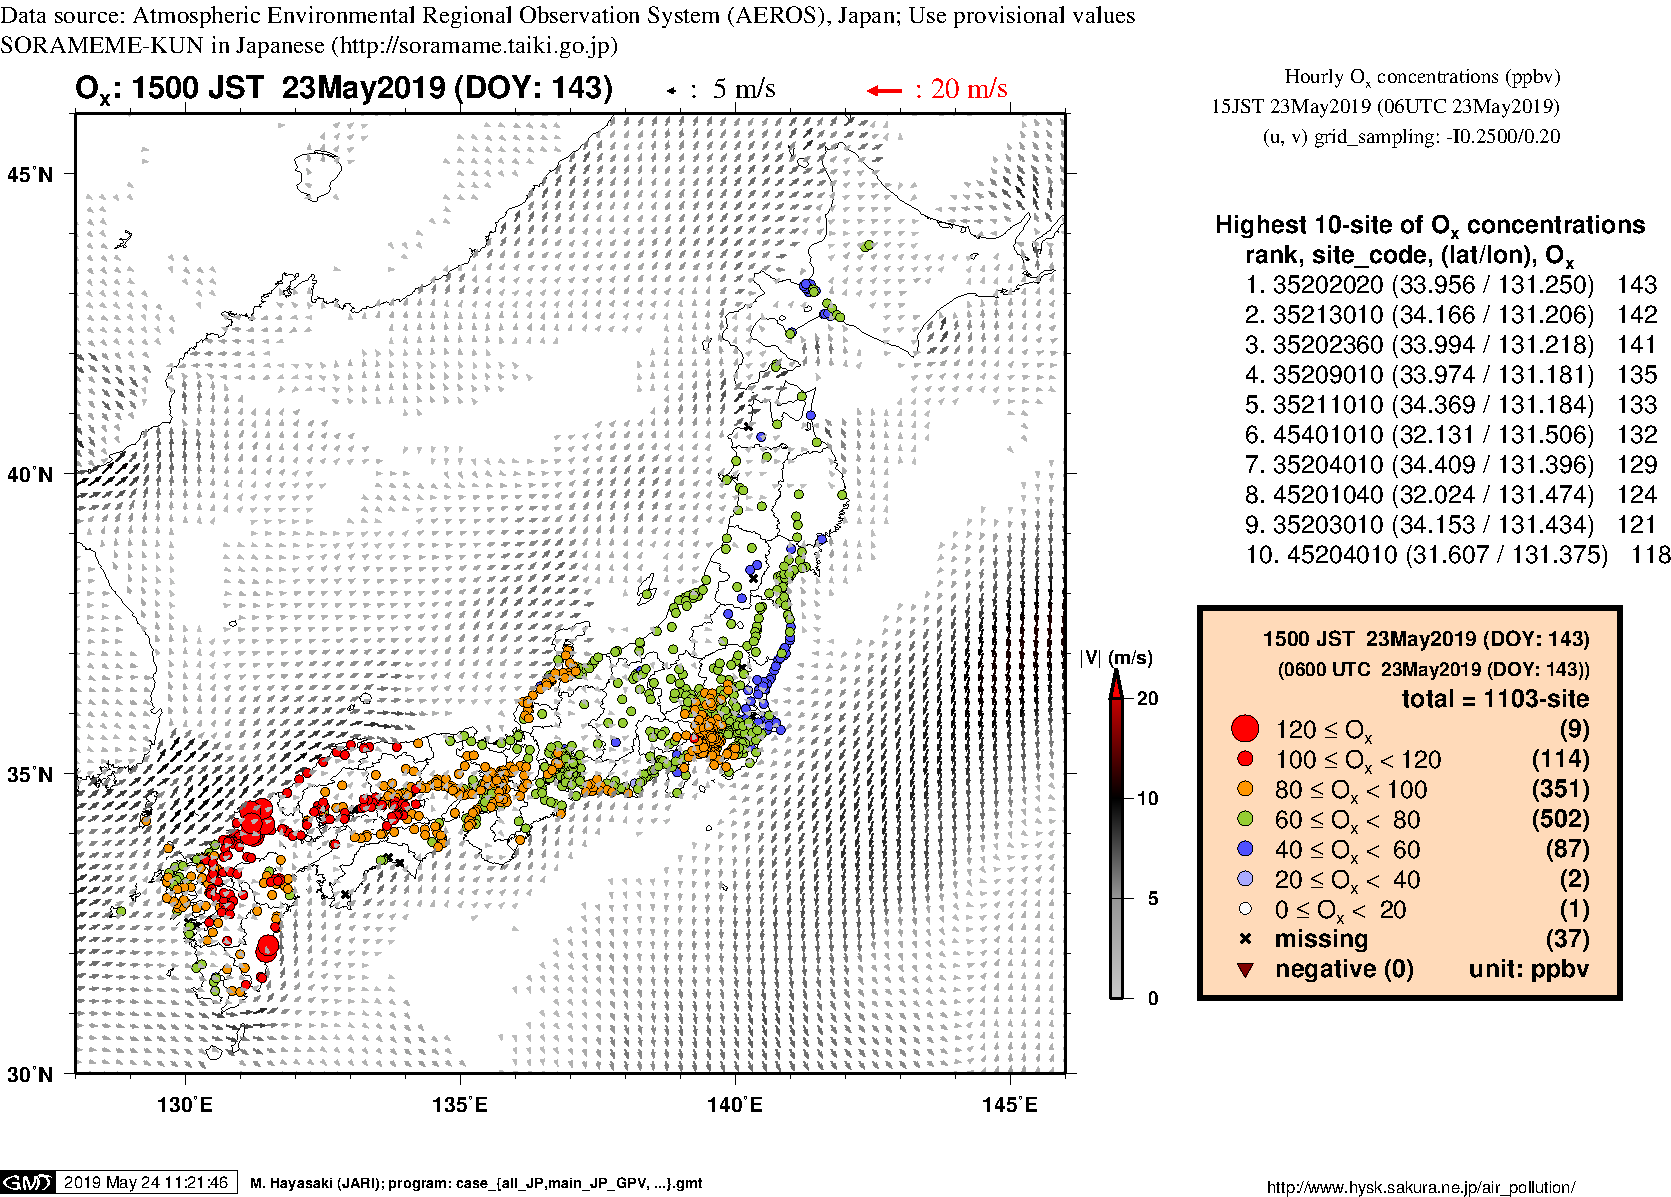 Ox concentration in mainland Japan (15JST 23May2019)